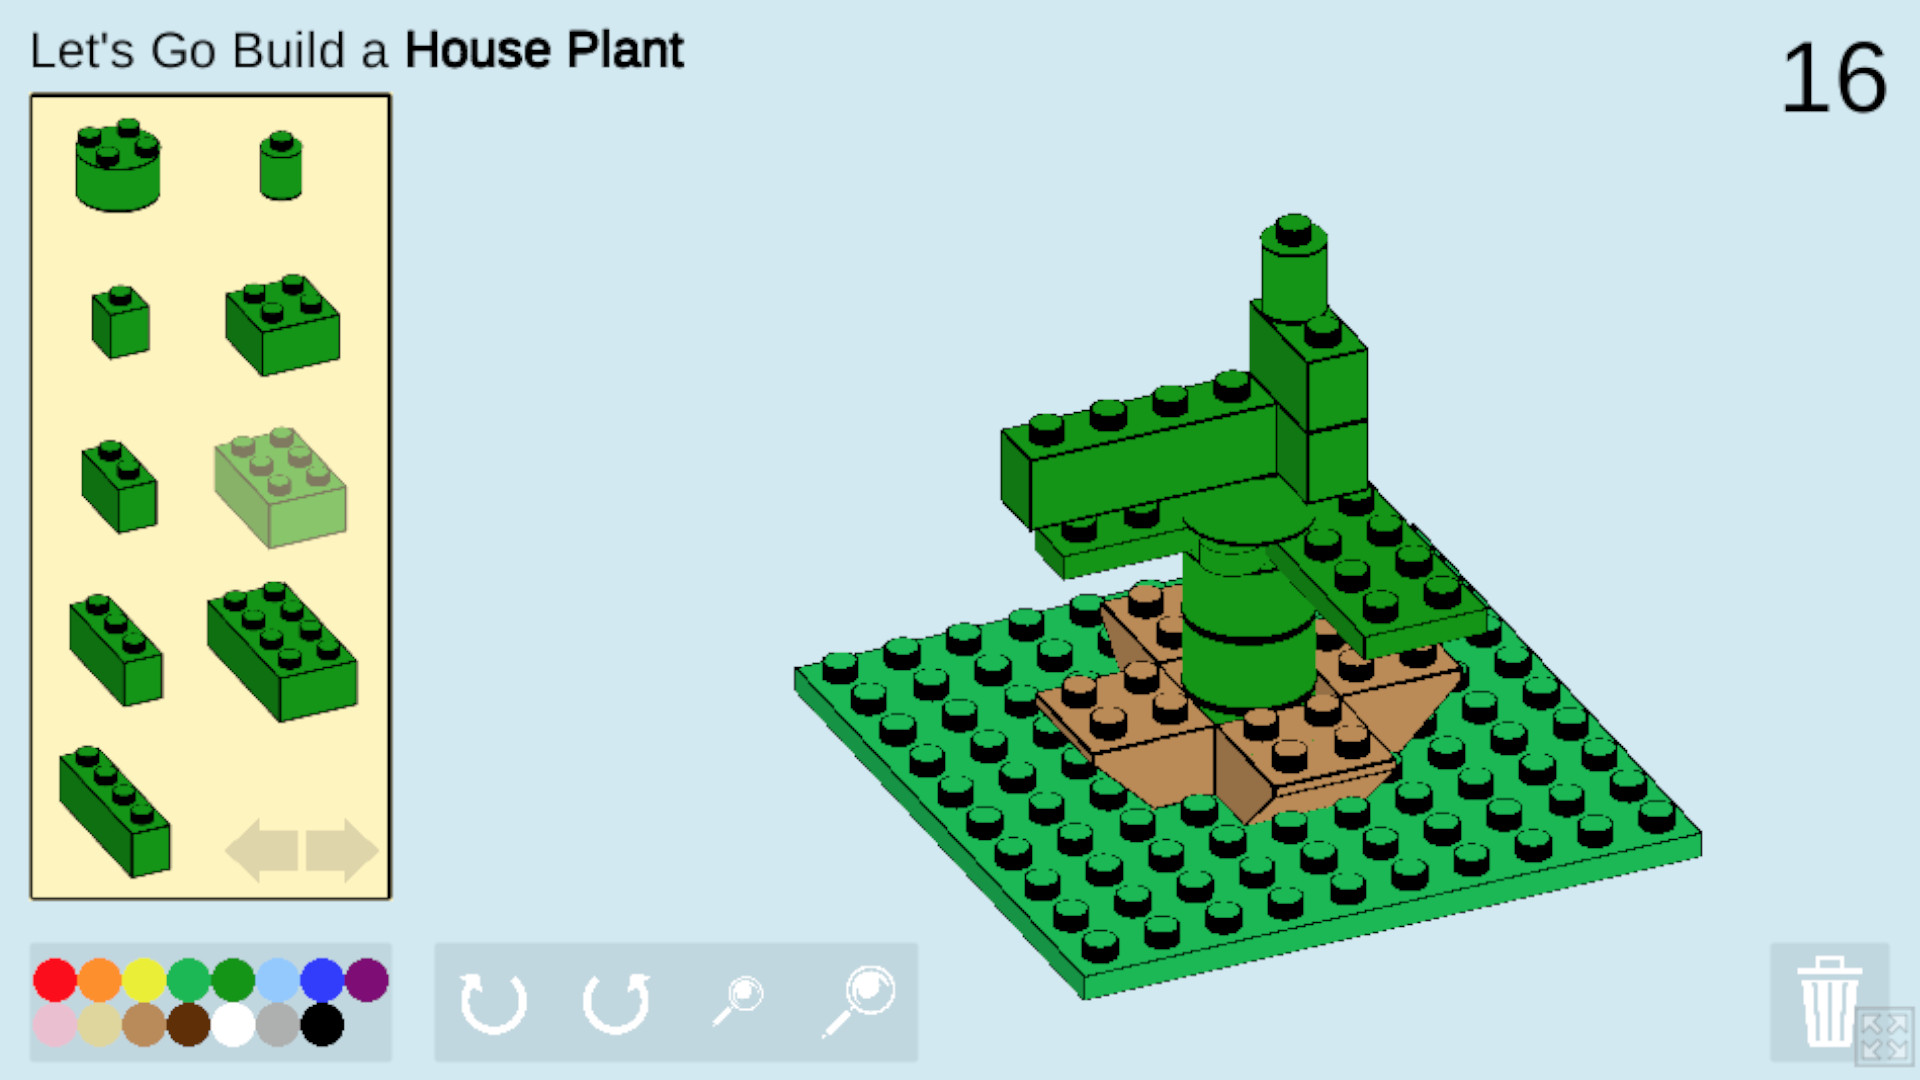 råolie skyld smog This free browser game gives you a daily Lego build | PCGamesN